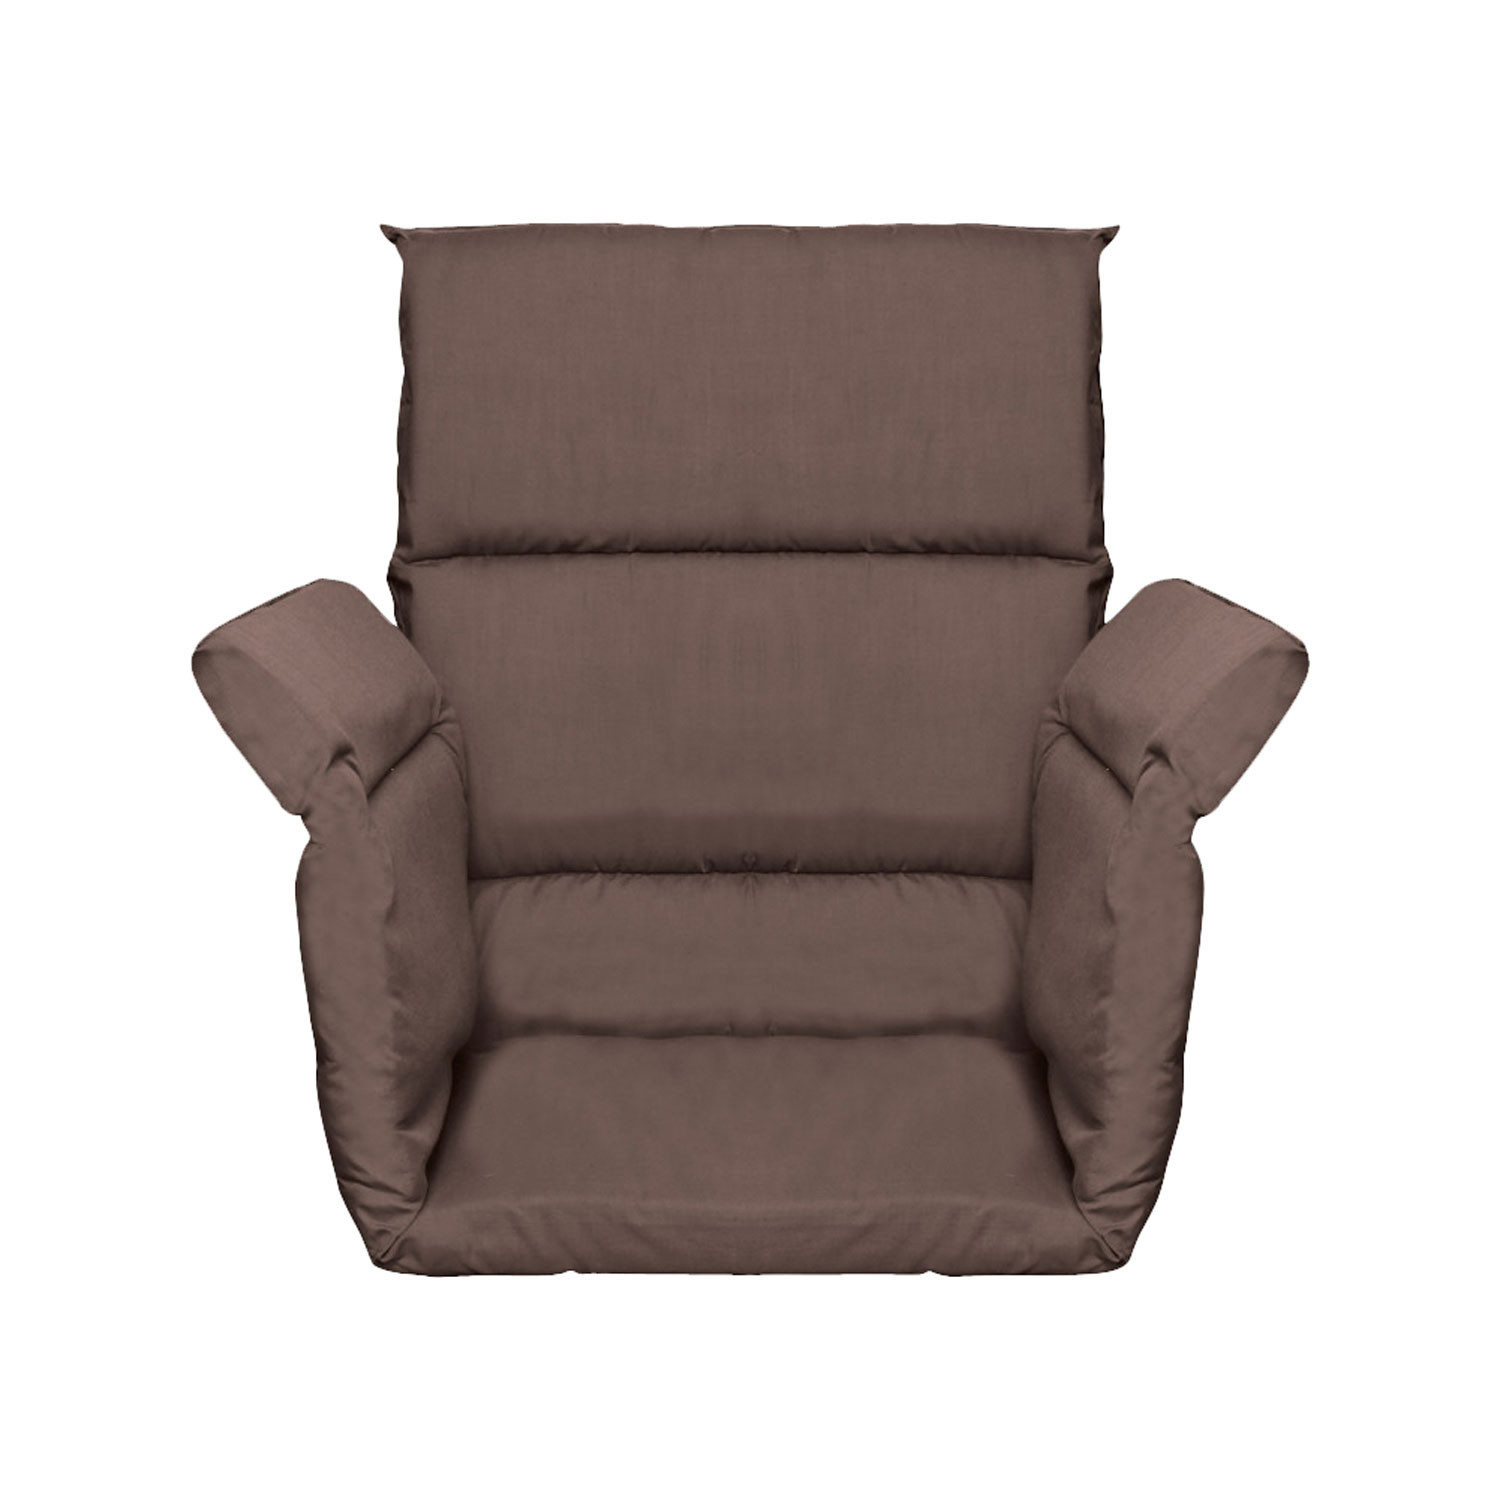 EasyComforts Total Chair and Wheelchair Pressure Relief Cushion | eBay